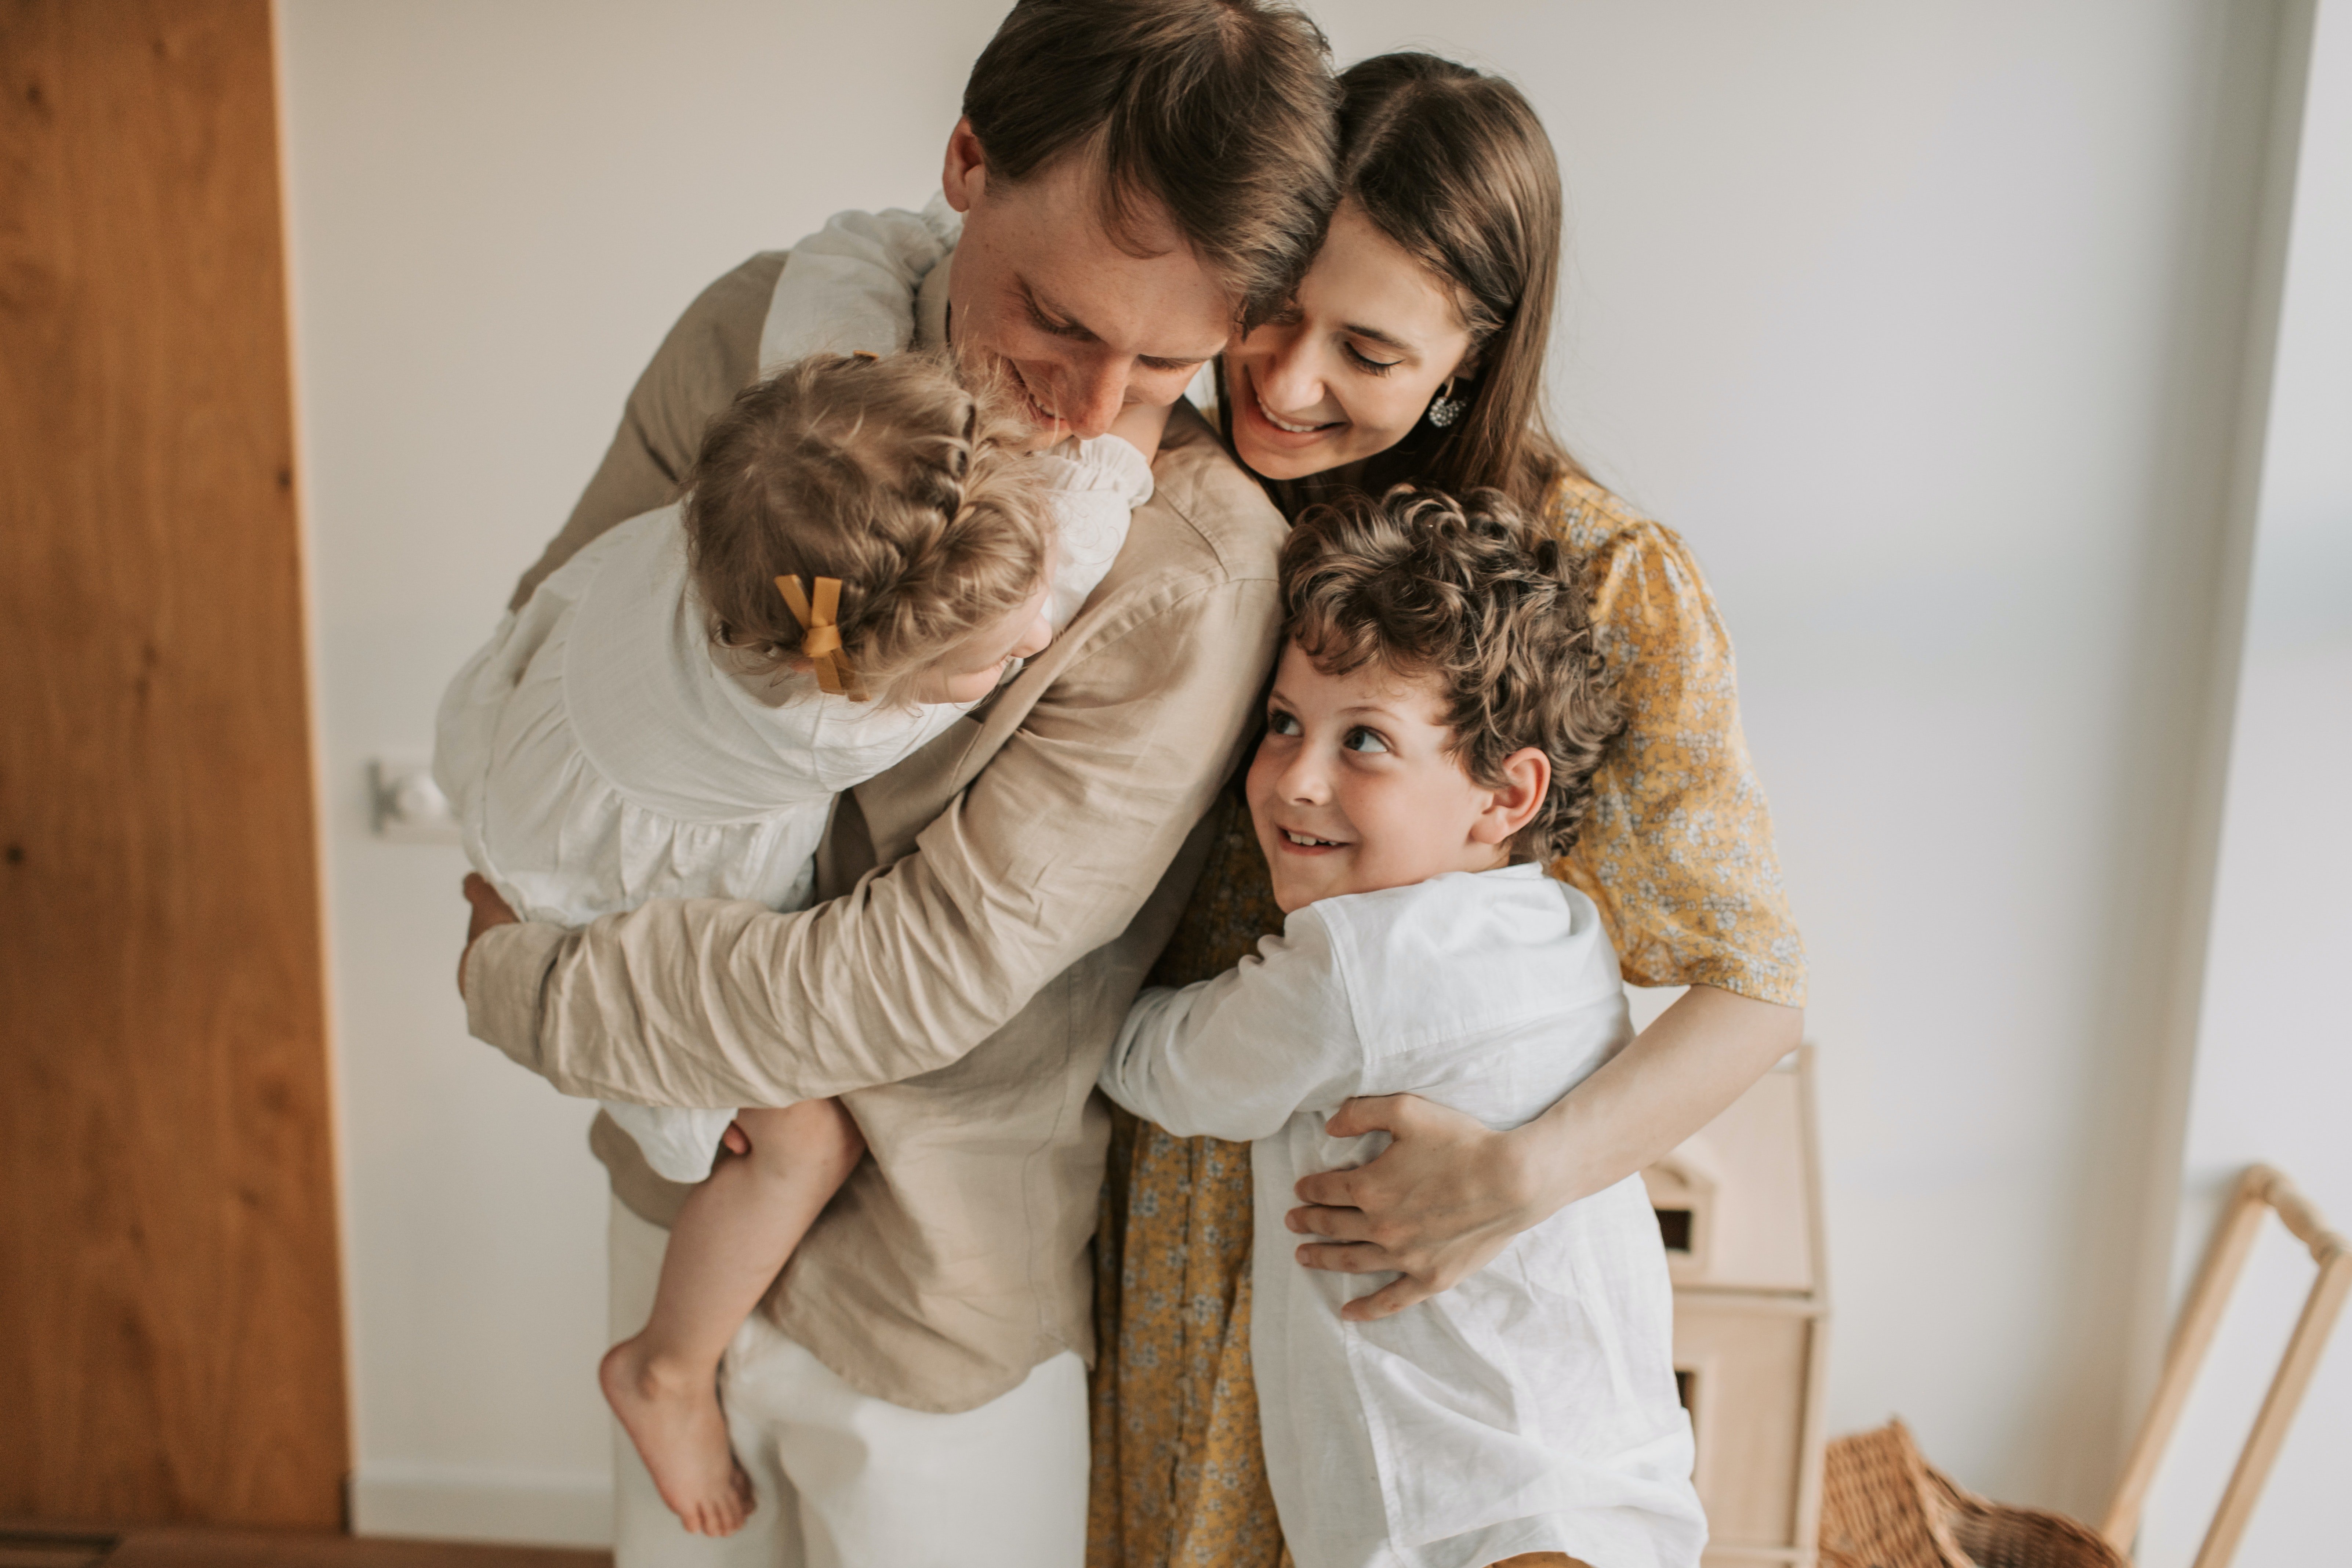 Nancy and Mr. Wilson got married and started a family | Photo: Pexels